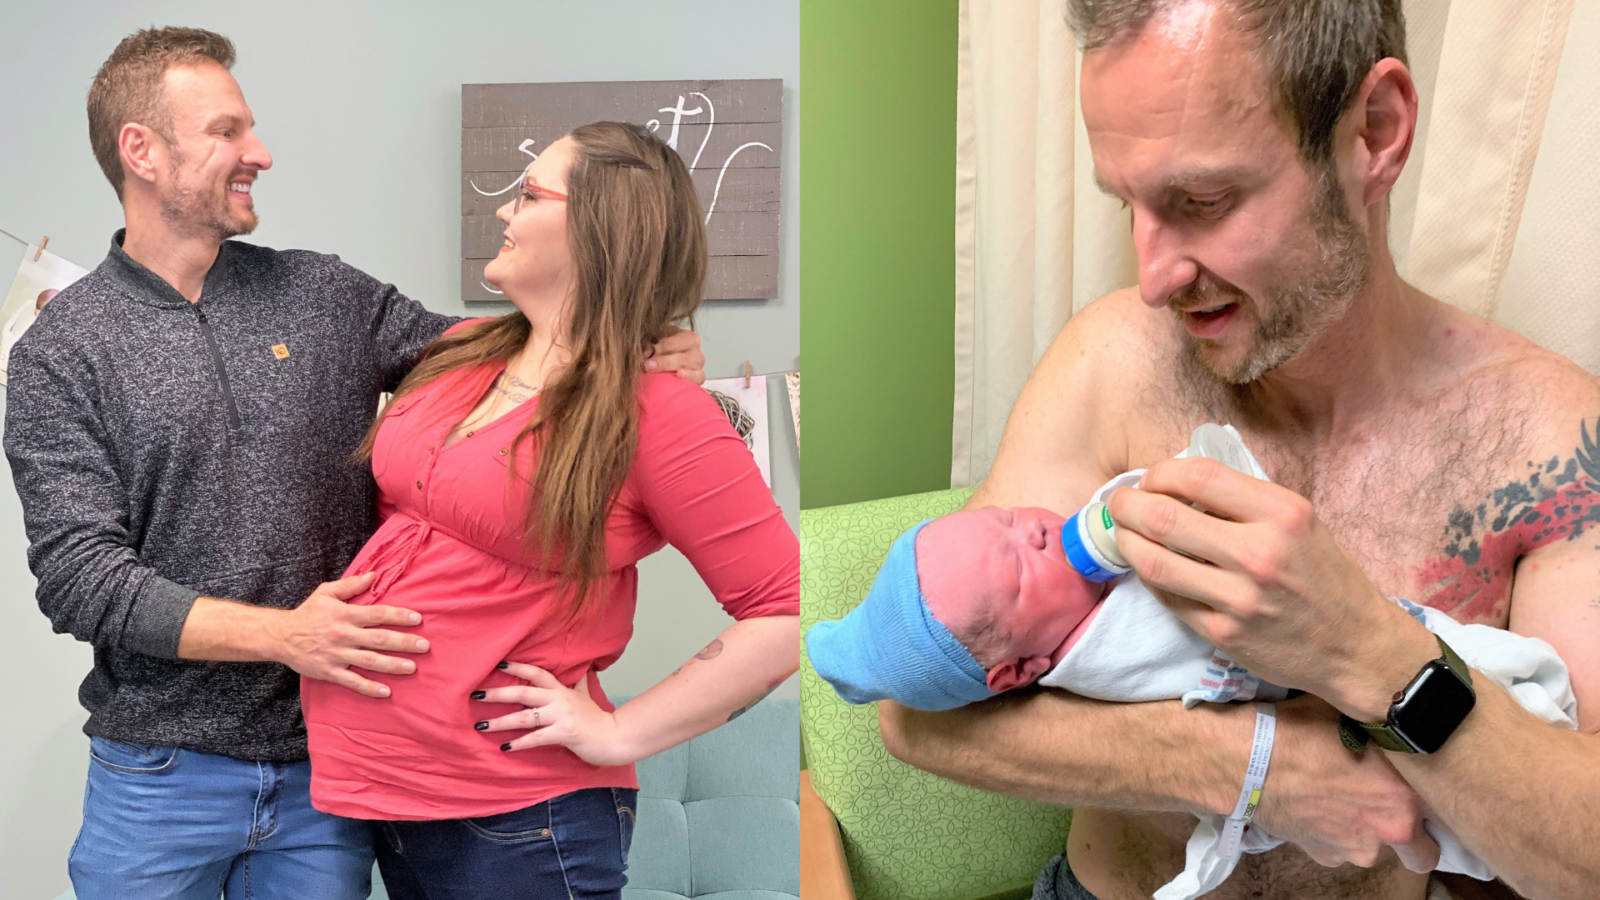 On the left, single dad takes a photo with his pregnant surrogate, on the right, single dad holds his newborn son while bottle feeding him